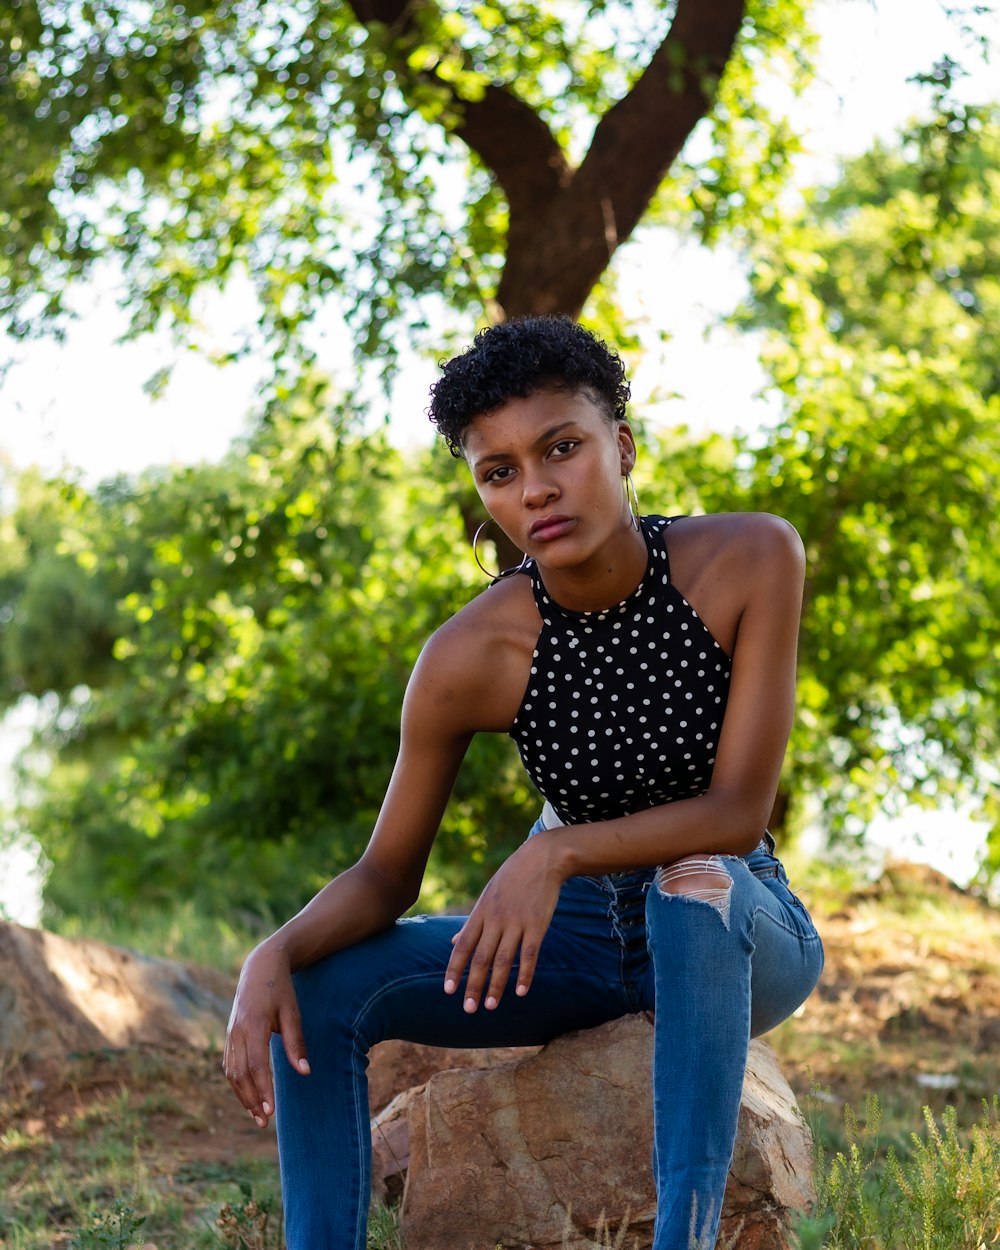 Woman in black and white polka dot tank top and blue denim jeans sitting on  brown photo – Free Johannesburg Image on Unsplash